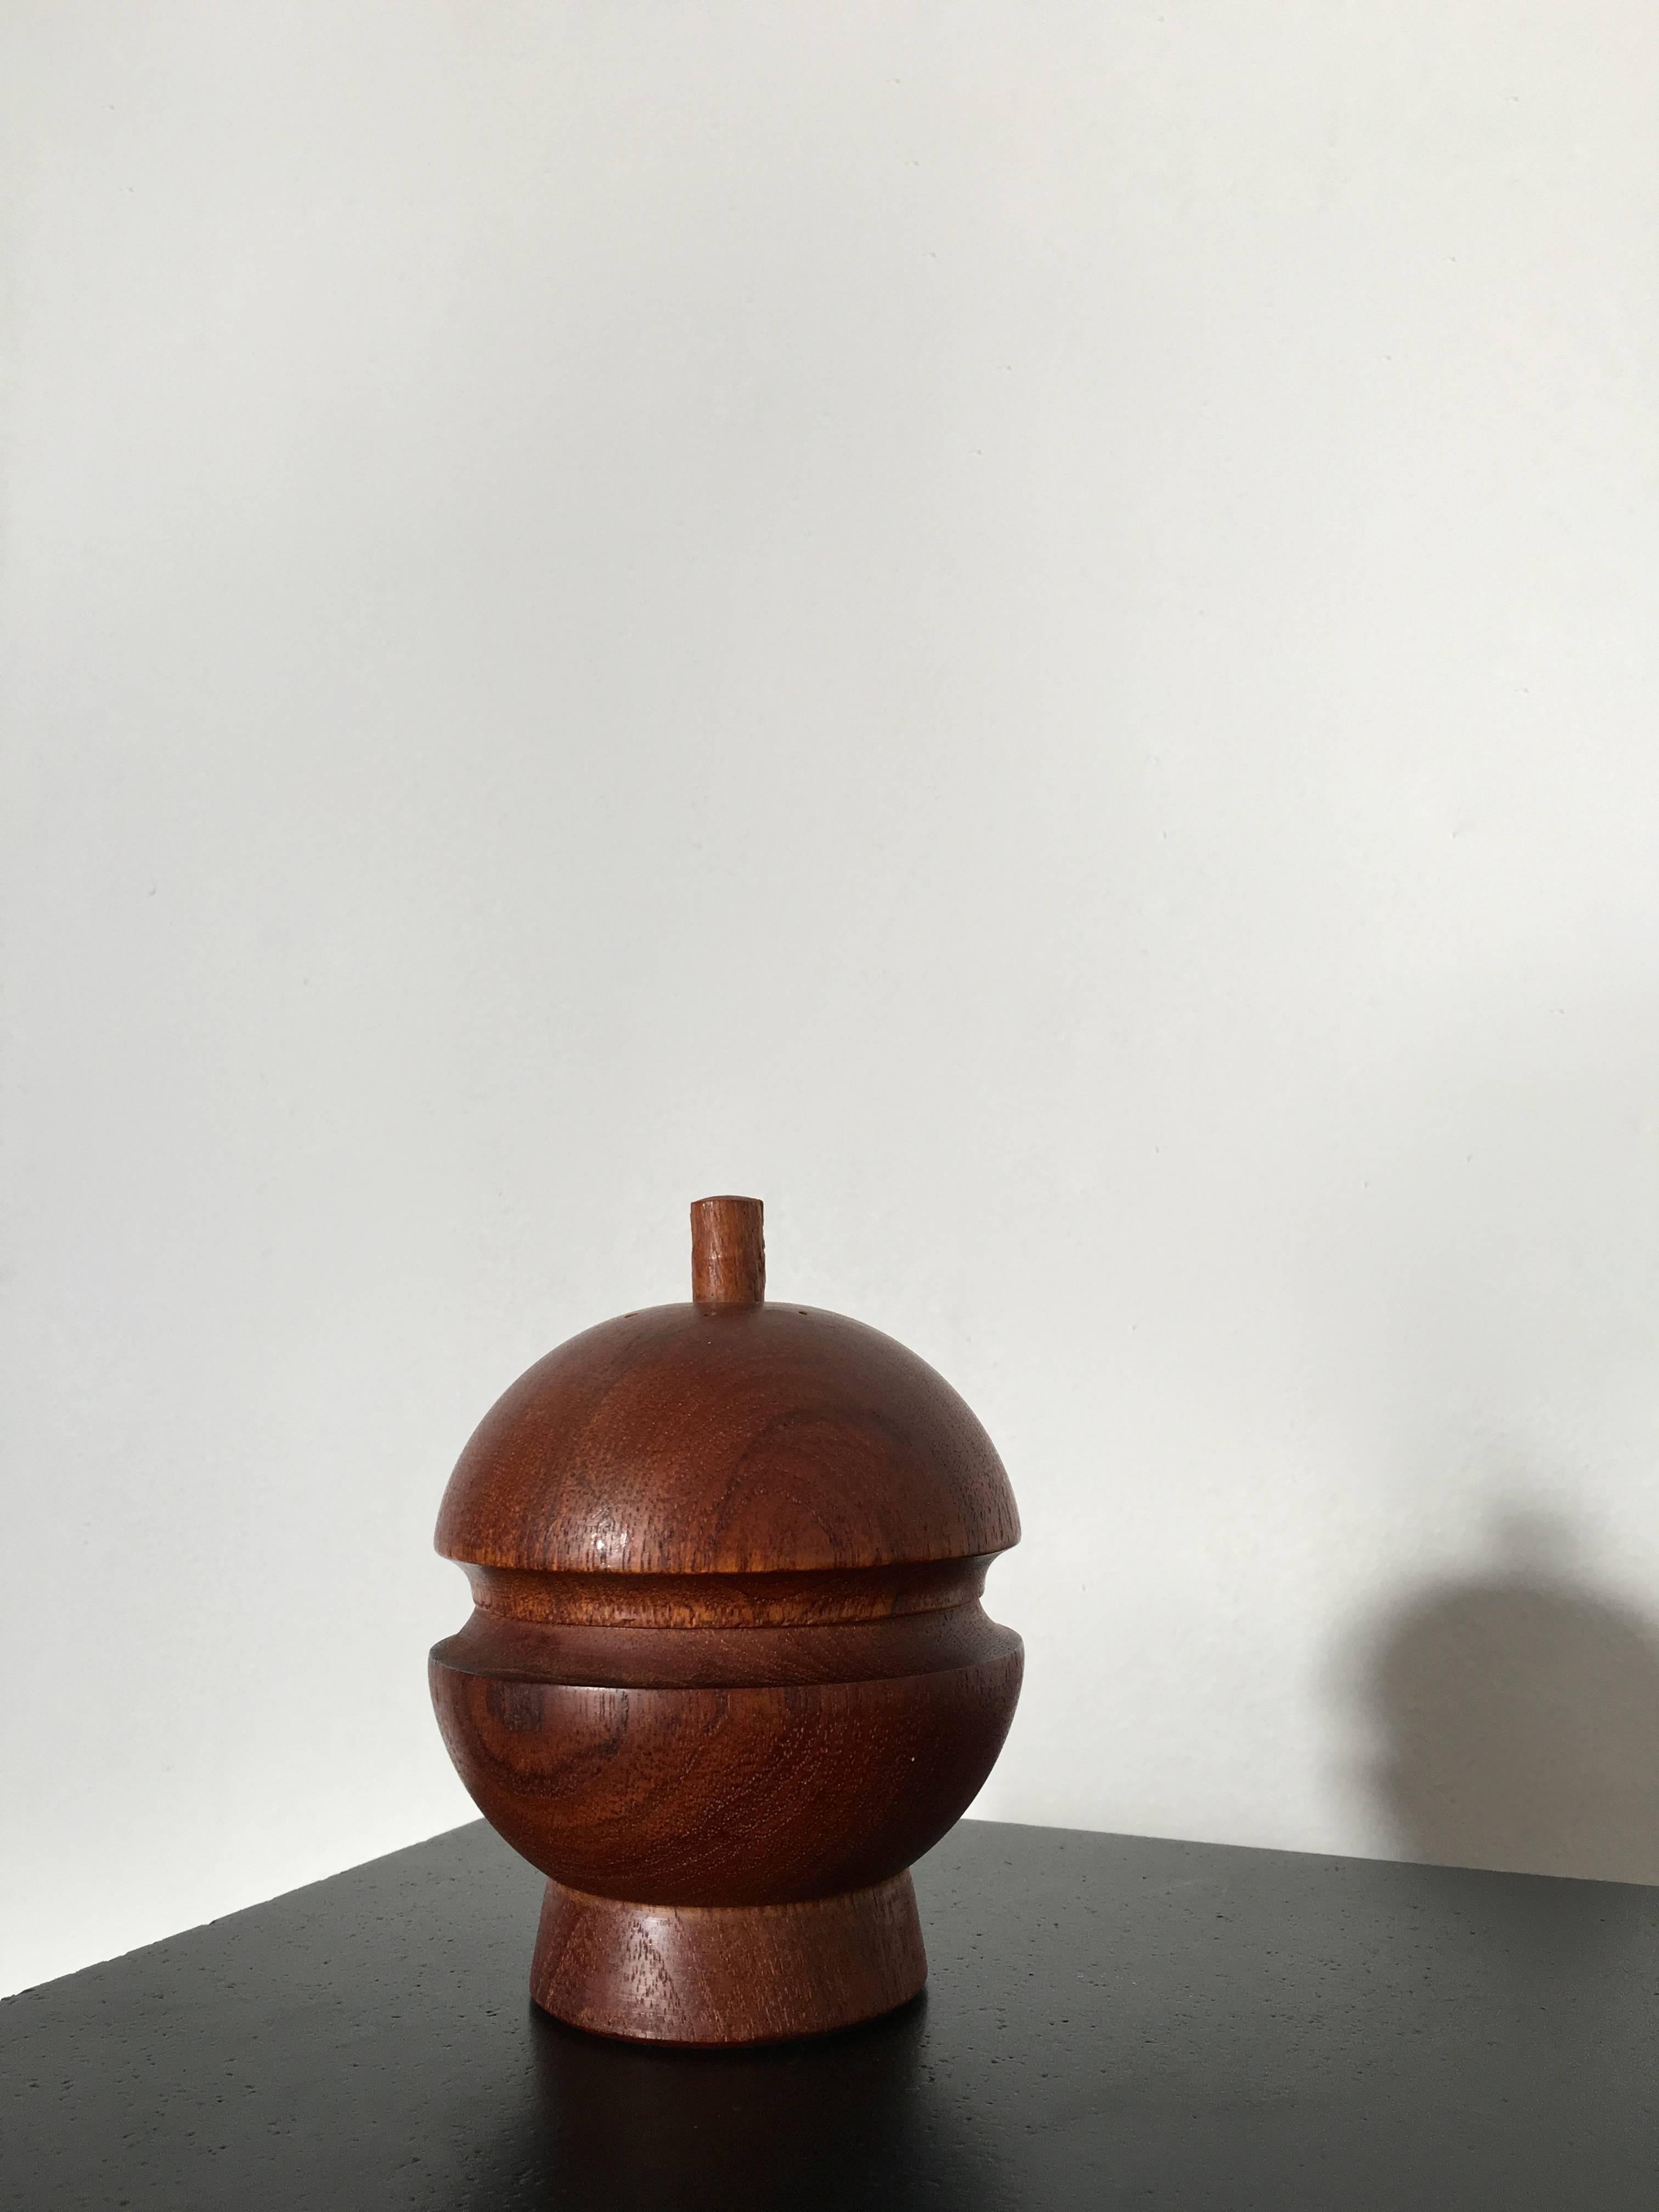 Jens Quistgaard teak pepper mill for Dansk with Peugeot. 

Model: Lisbet.
Removable top peg with top for salt and lower pepper mill,
 
Denmark, circa 1960s.

Measure: 4.65' H x 3.6